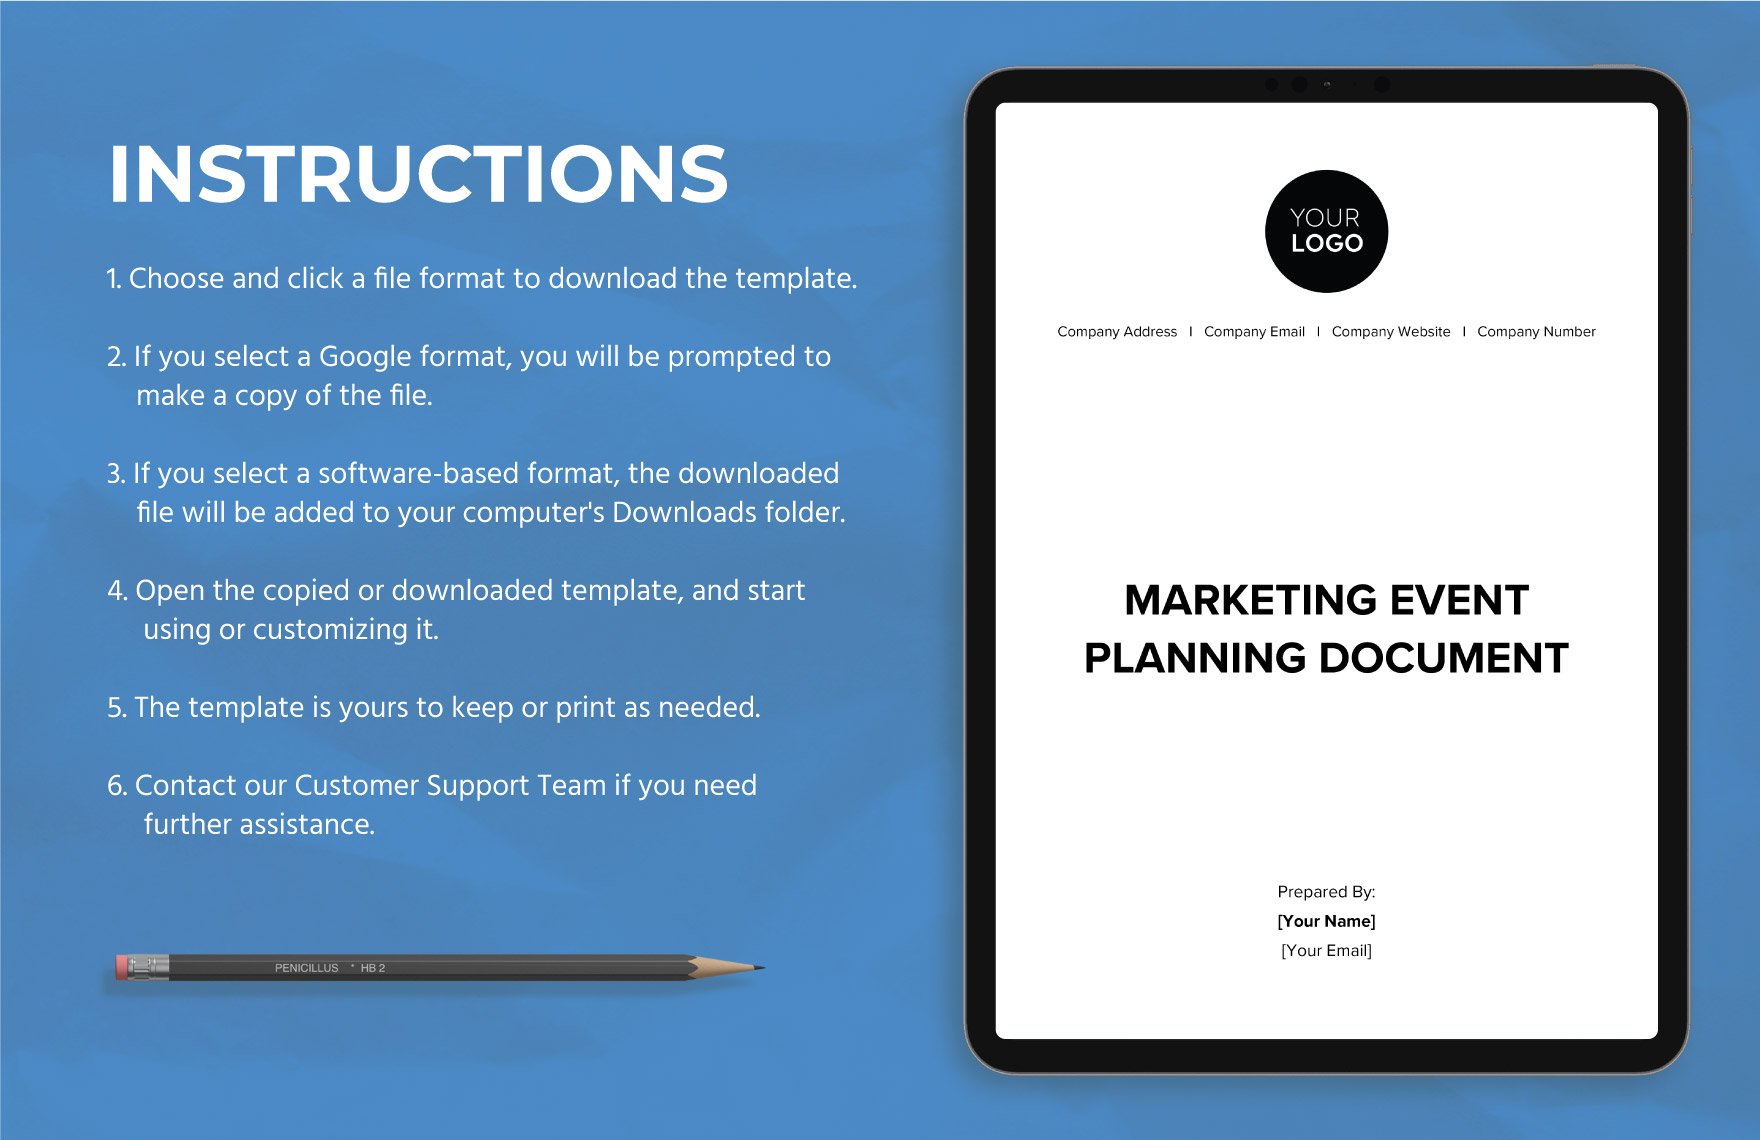 Marketing Event Planning Document Template